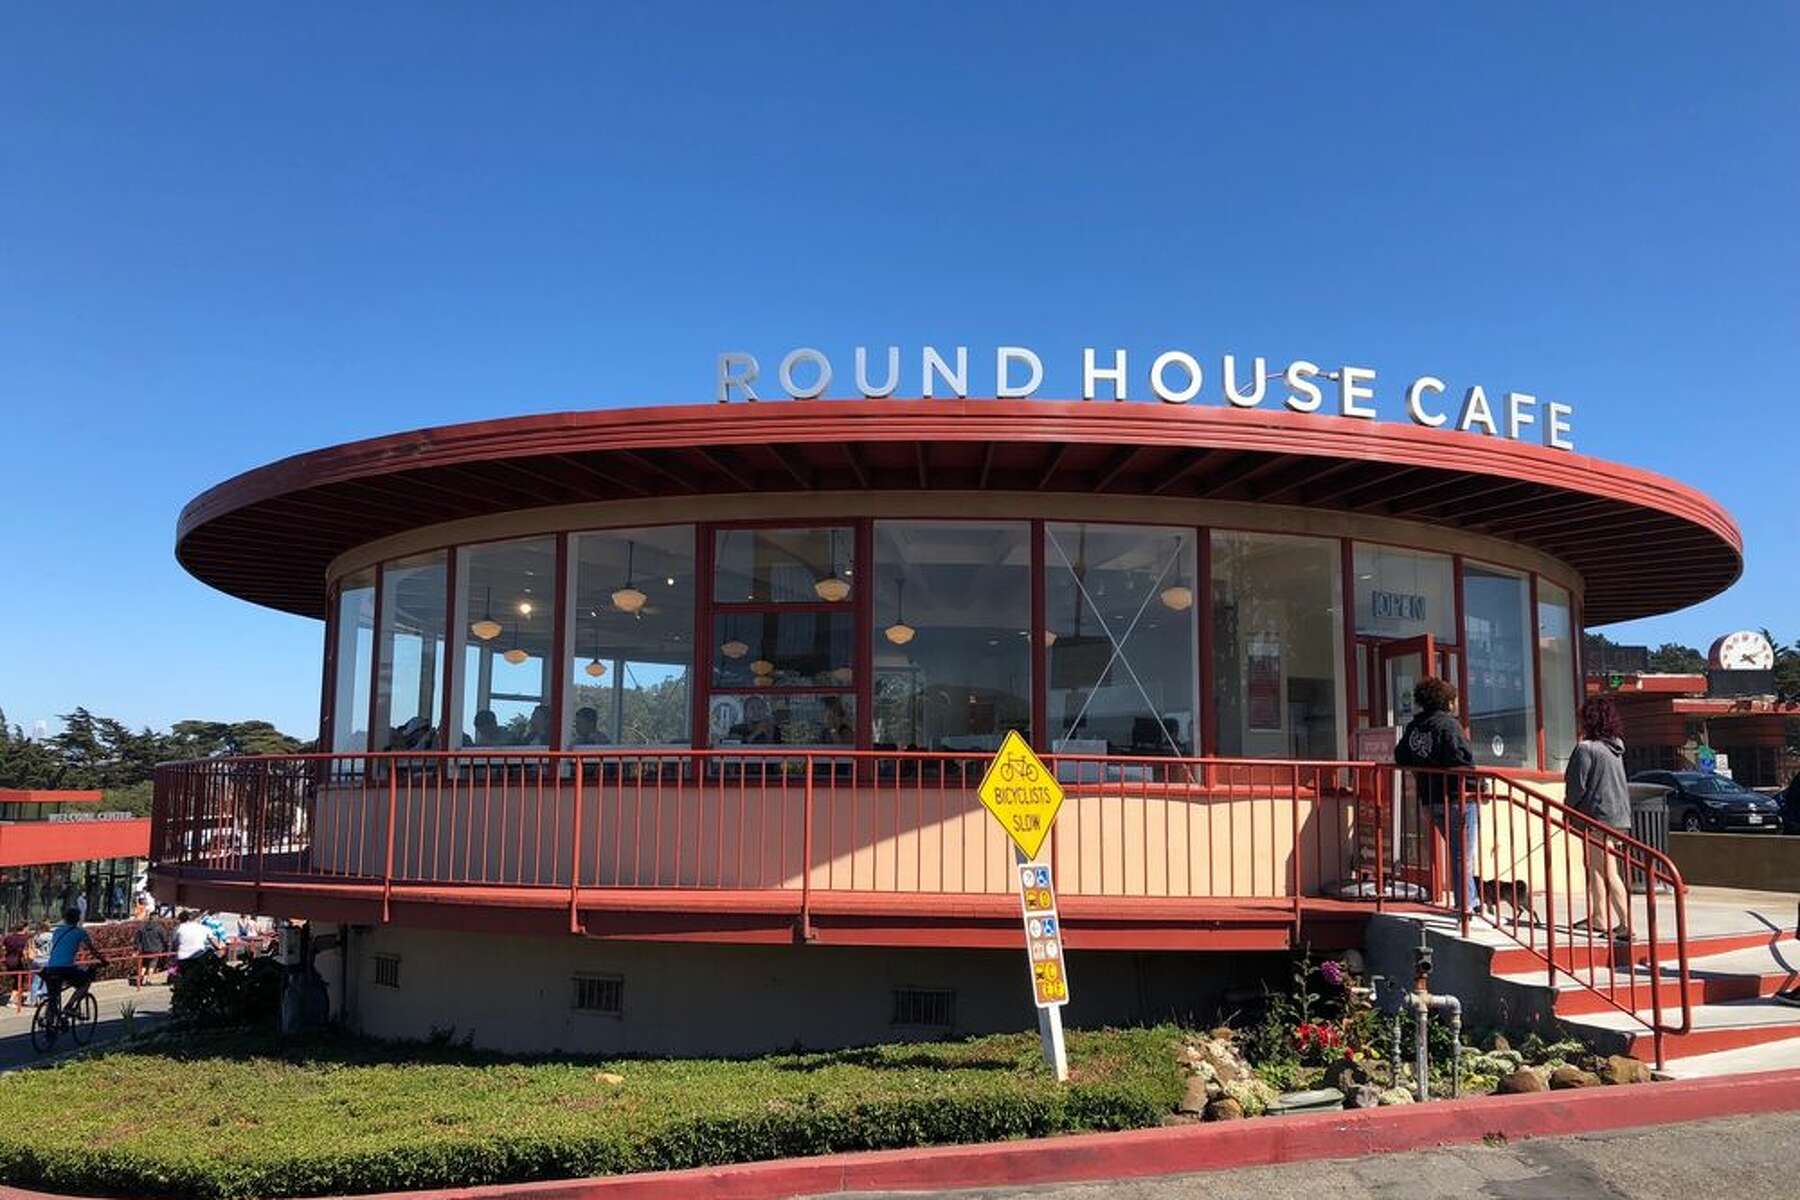 The Sf Golden Gate Bridge S Round House Cafe Will Reopen As An Equator Coffee Shop